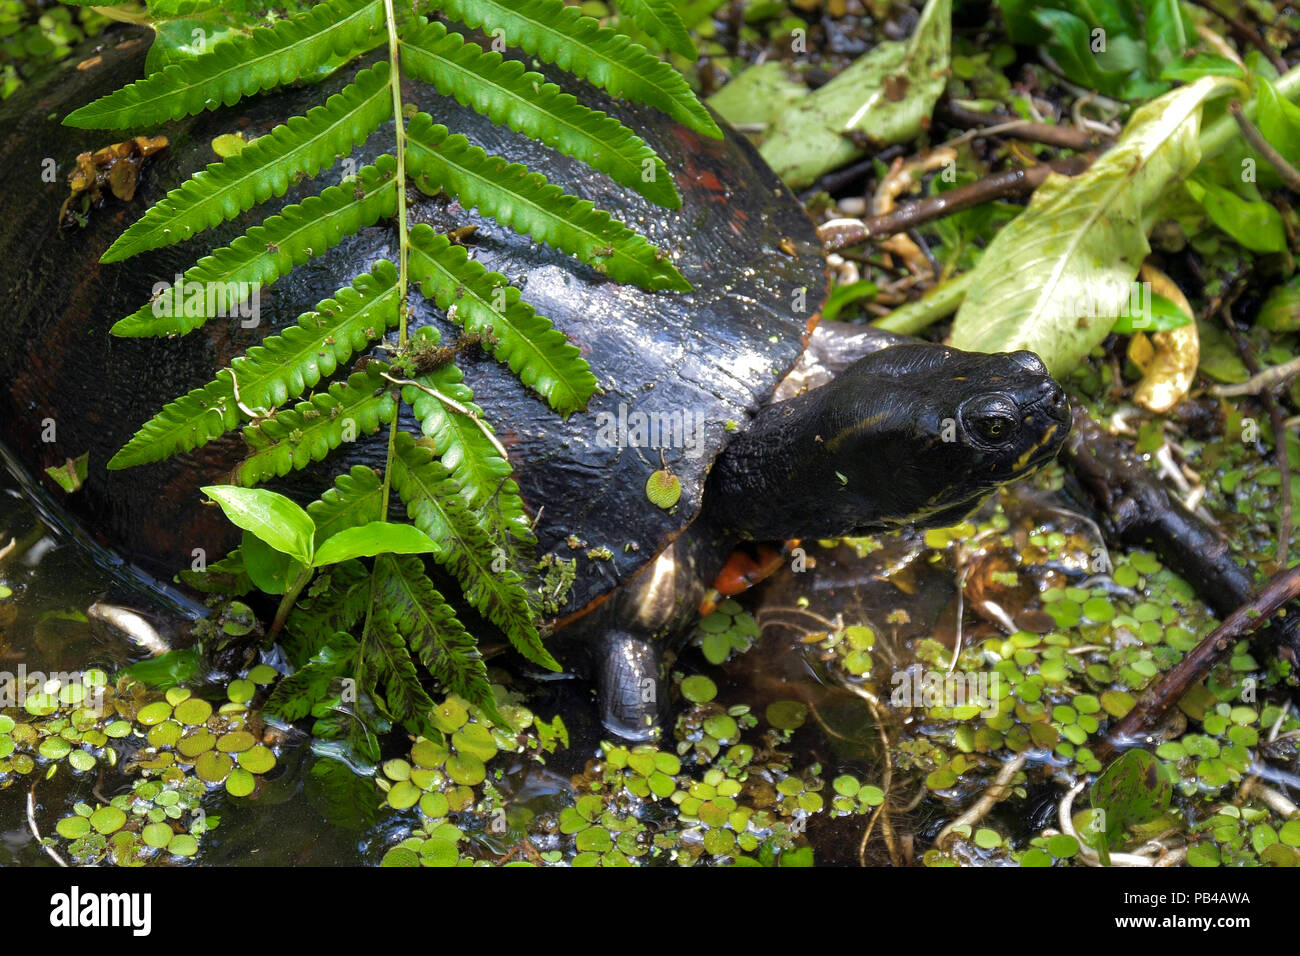 Freshwater turtle in a natural habitat. Eastern River Cooter Turtle. Freshwater turtles in the swampy terrain of Florida. River Cooter Turtle, Pseudem Stock Photo